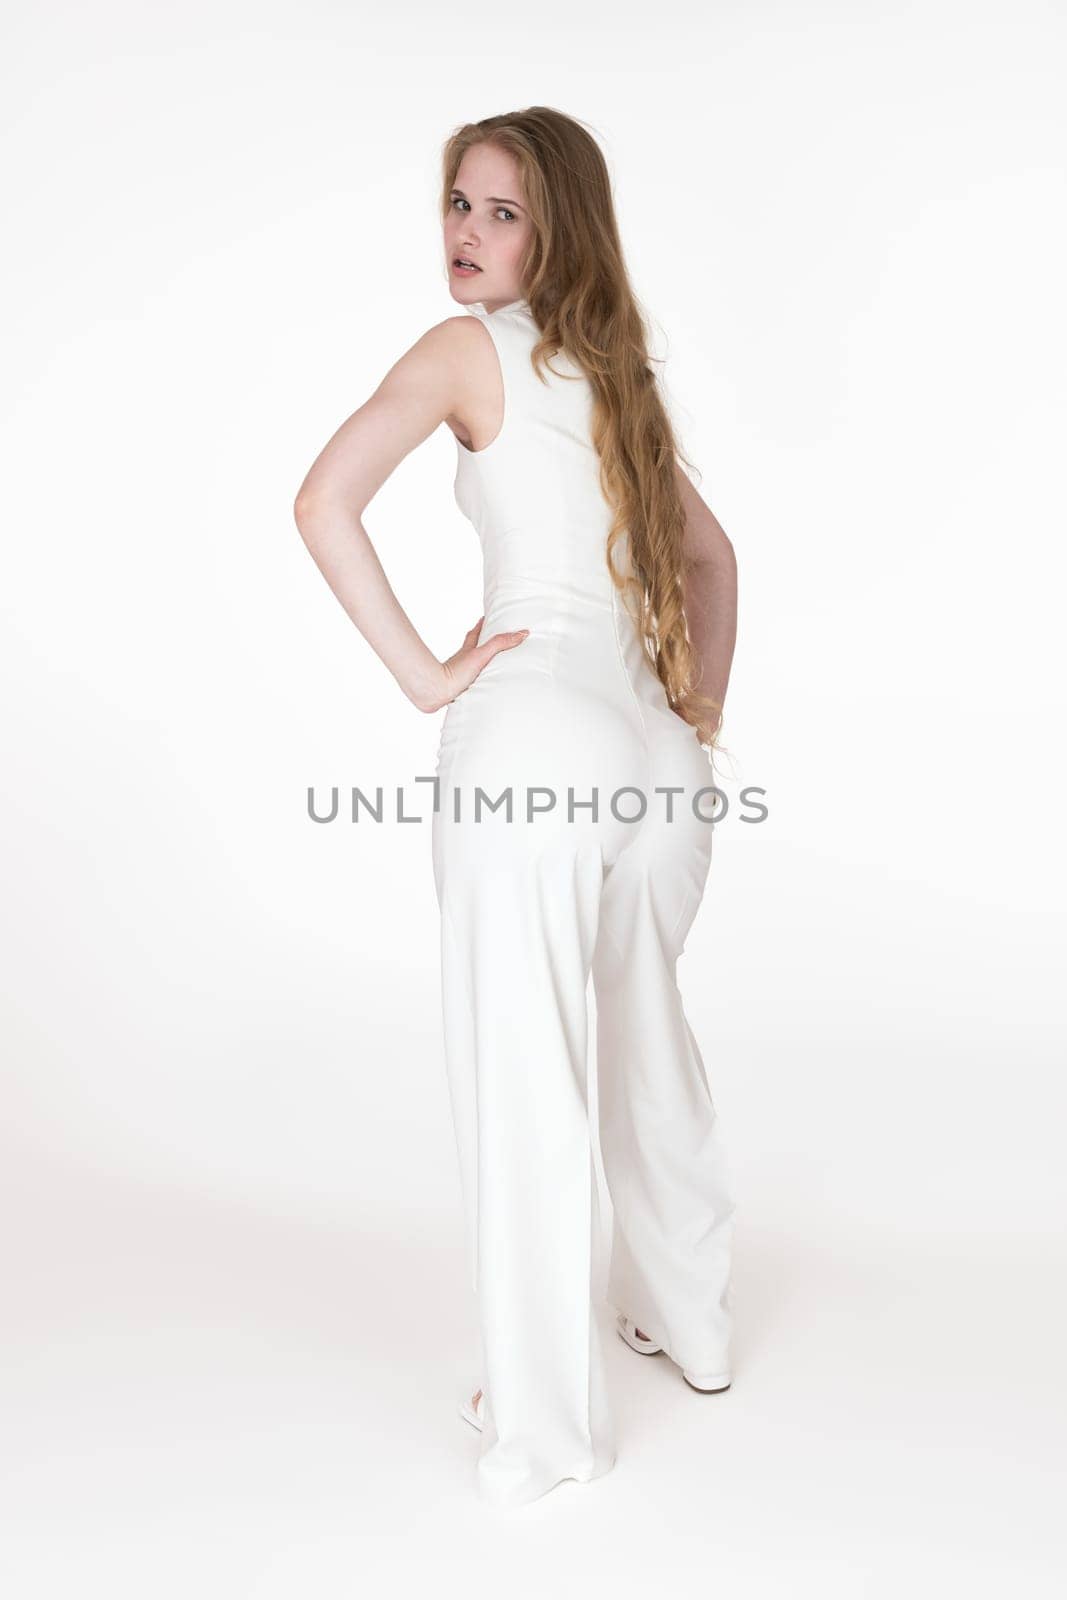 Back view of young adult woman looking over shoulder at camera dressed in white long jumpsuit, standing arms akimbo on white background. Beautiful sexy woman model with long blonde hair. Studio shot